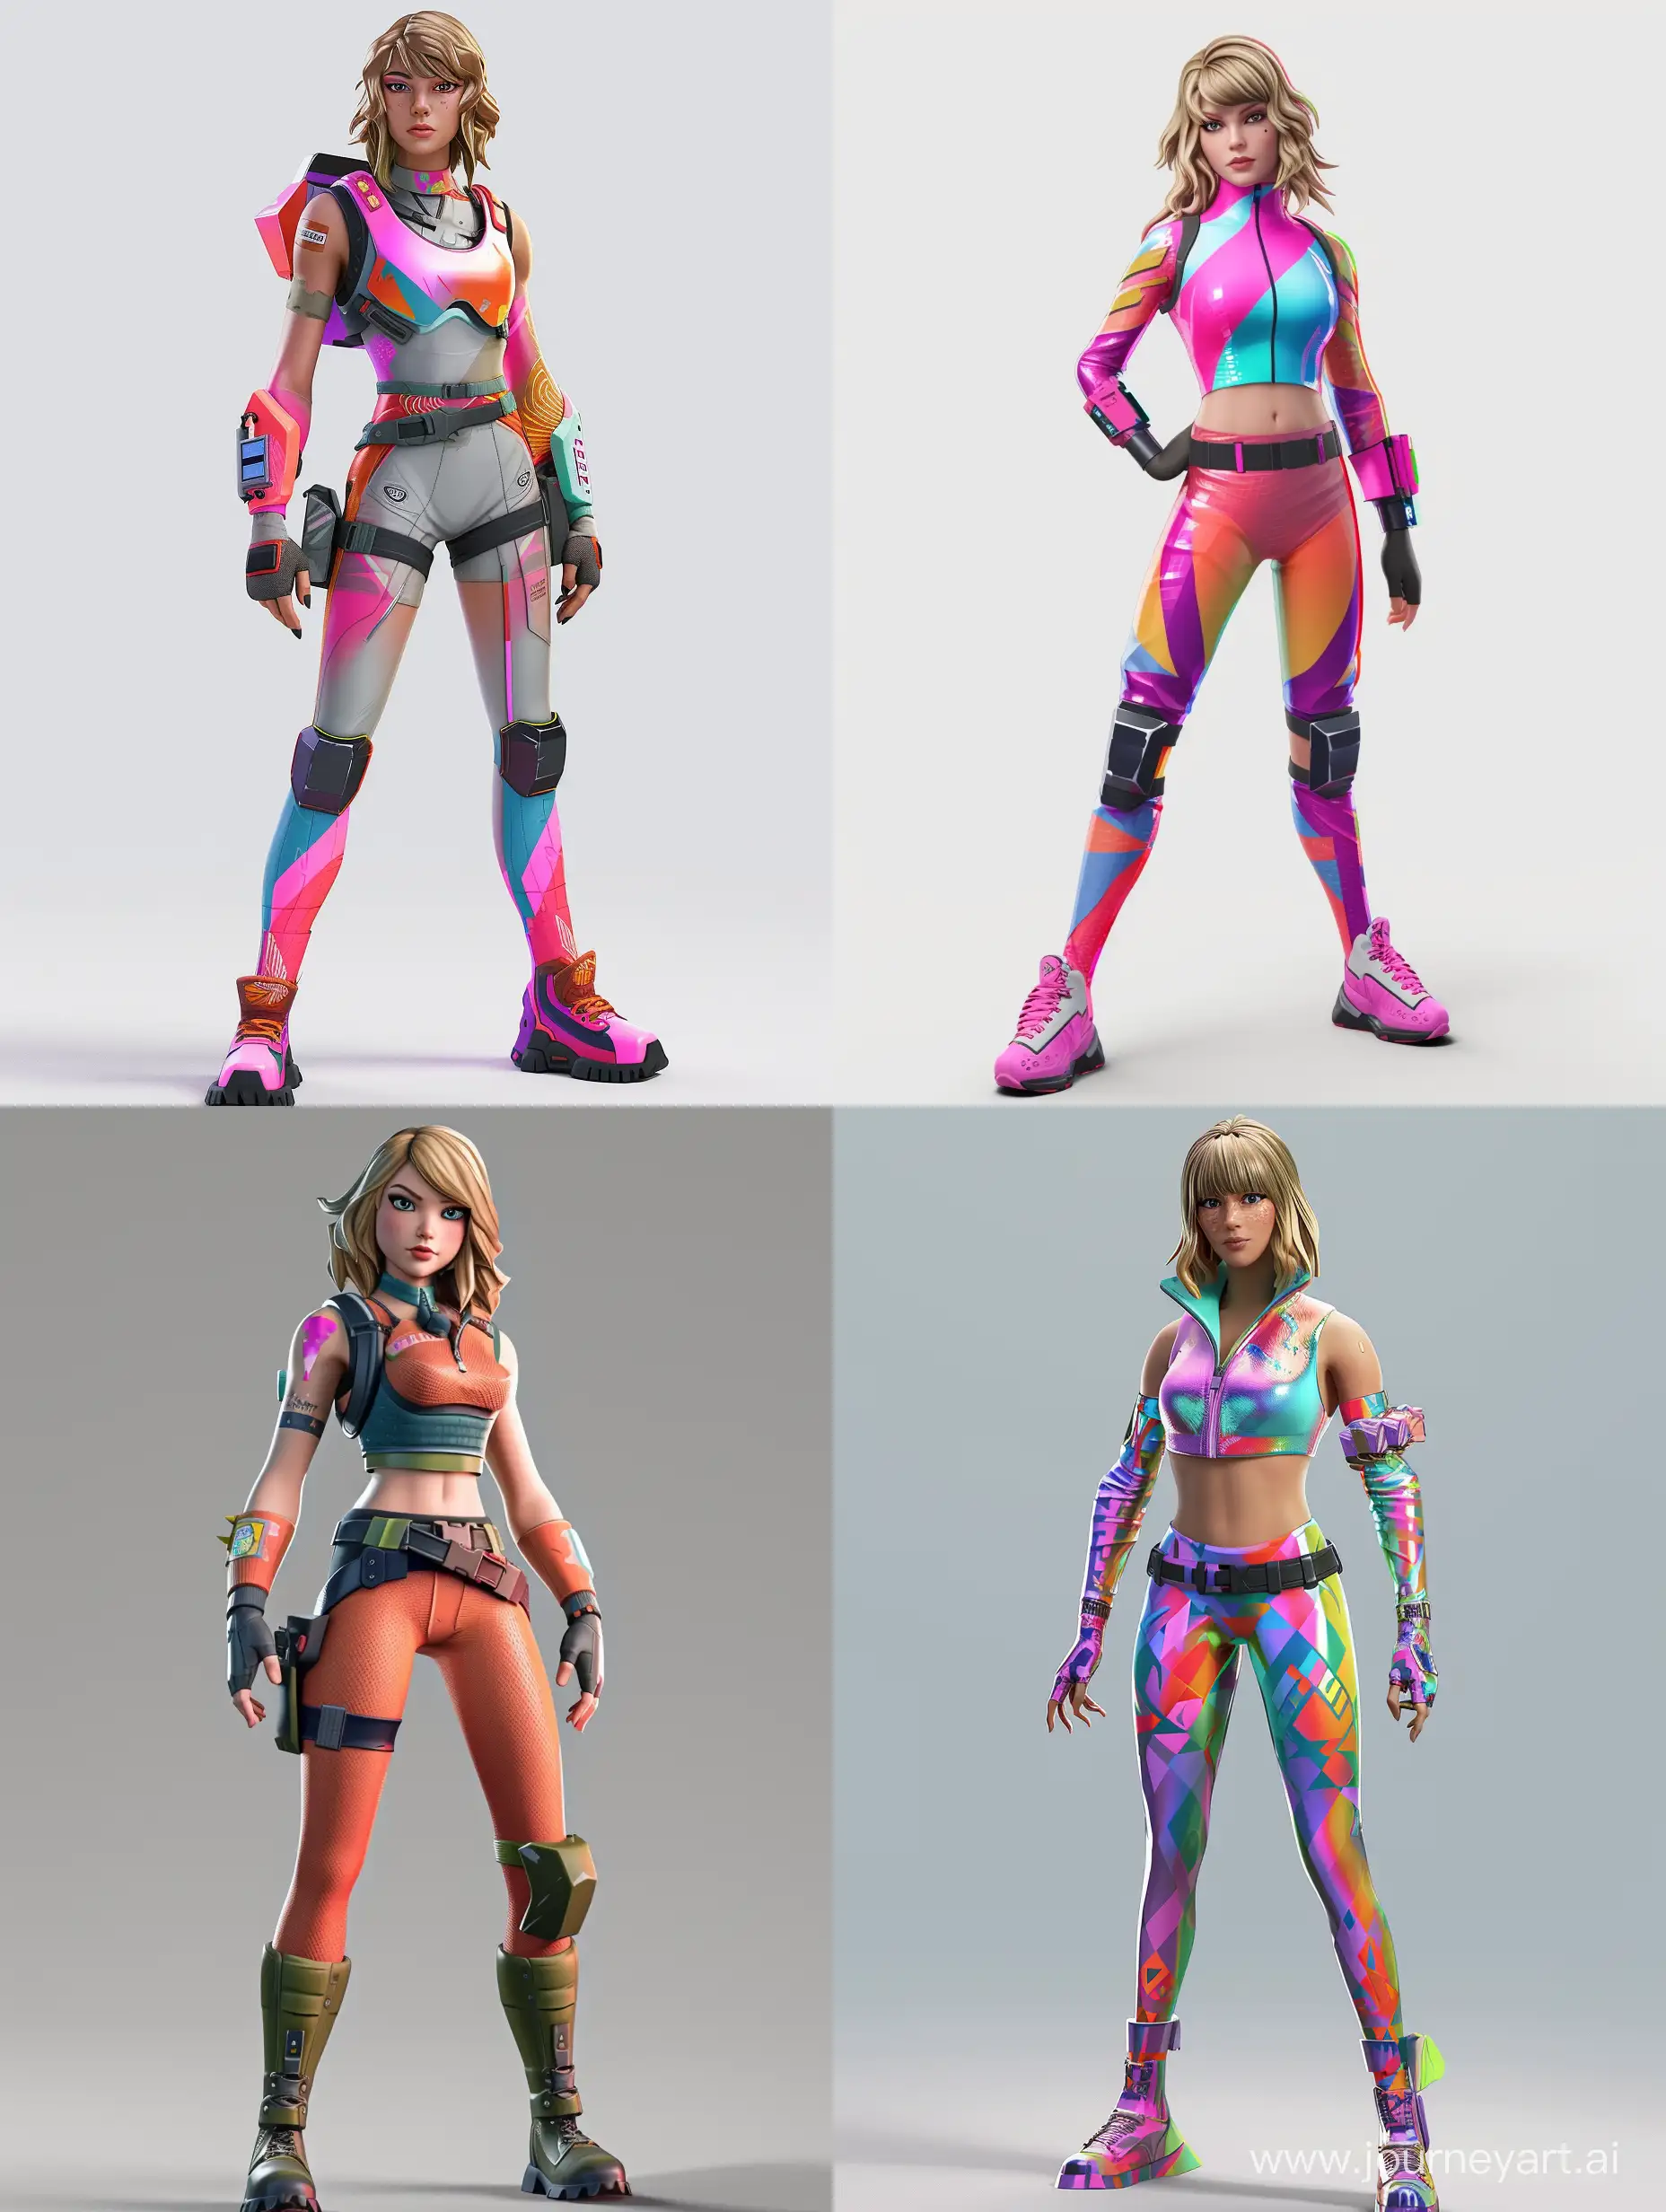 Taylor-Swift-Transformed-Vibrant-3D-Render-as-a-Fortnite-Character